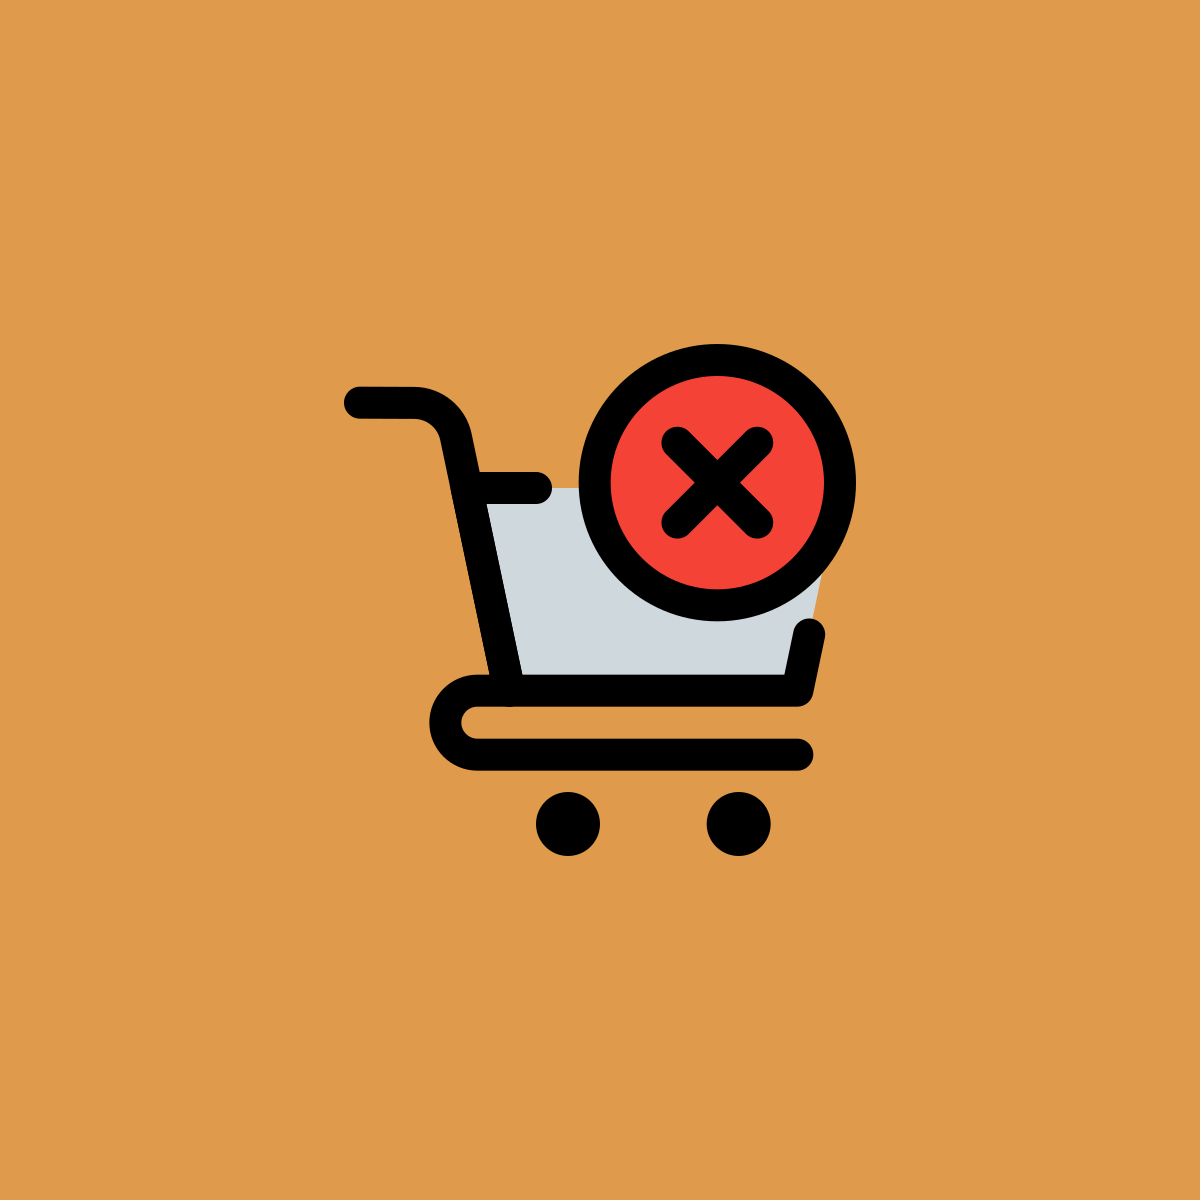 7 reasons why most e-commerce orders remain incomplete